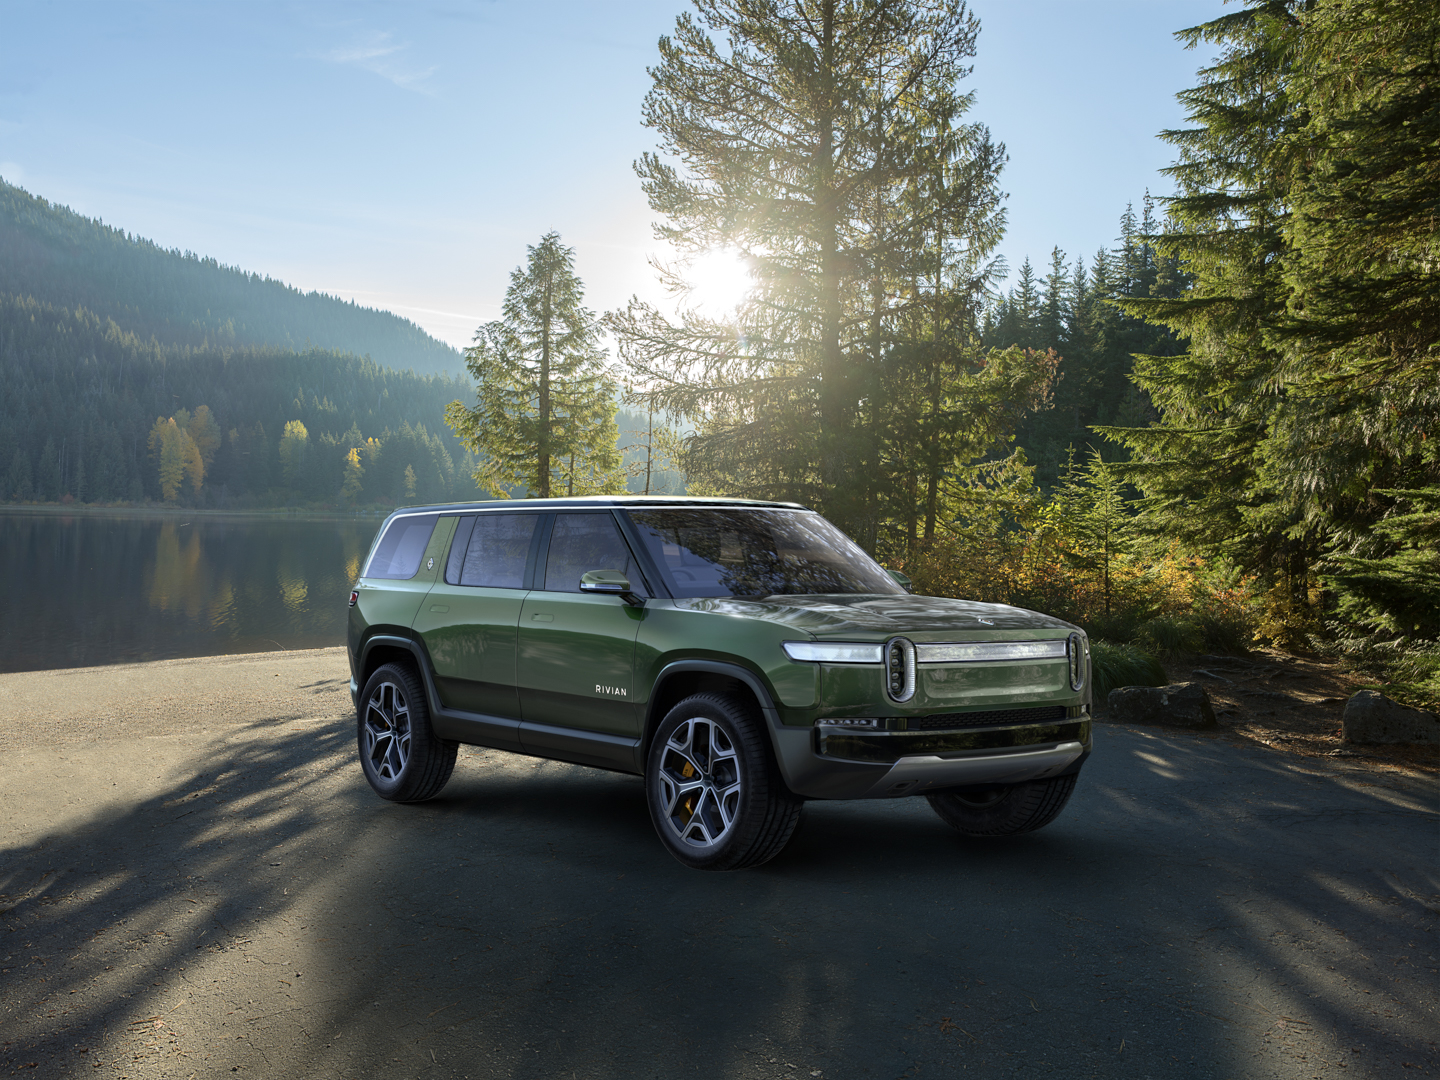 Finding the Right Electrical Vehicle – Features, Cost & Availability to Consider When Deciding Between Rivian R1S and IX M60.